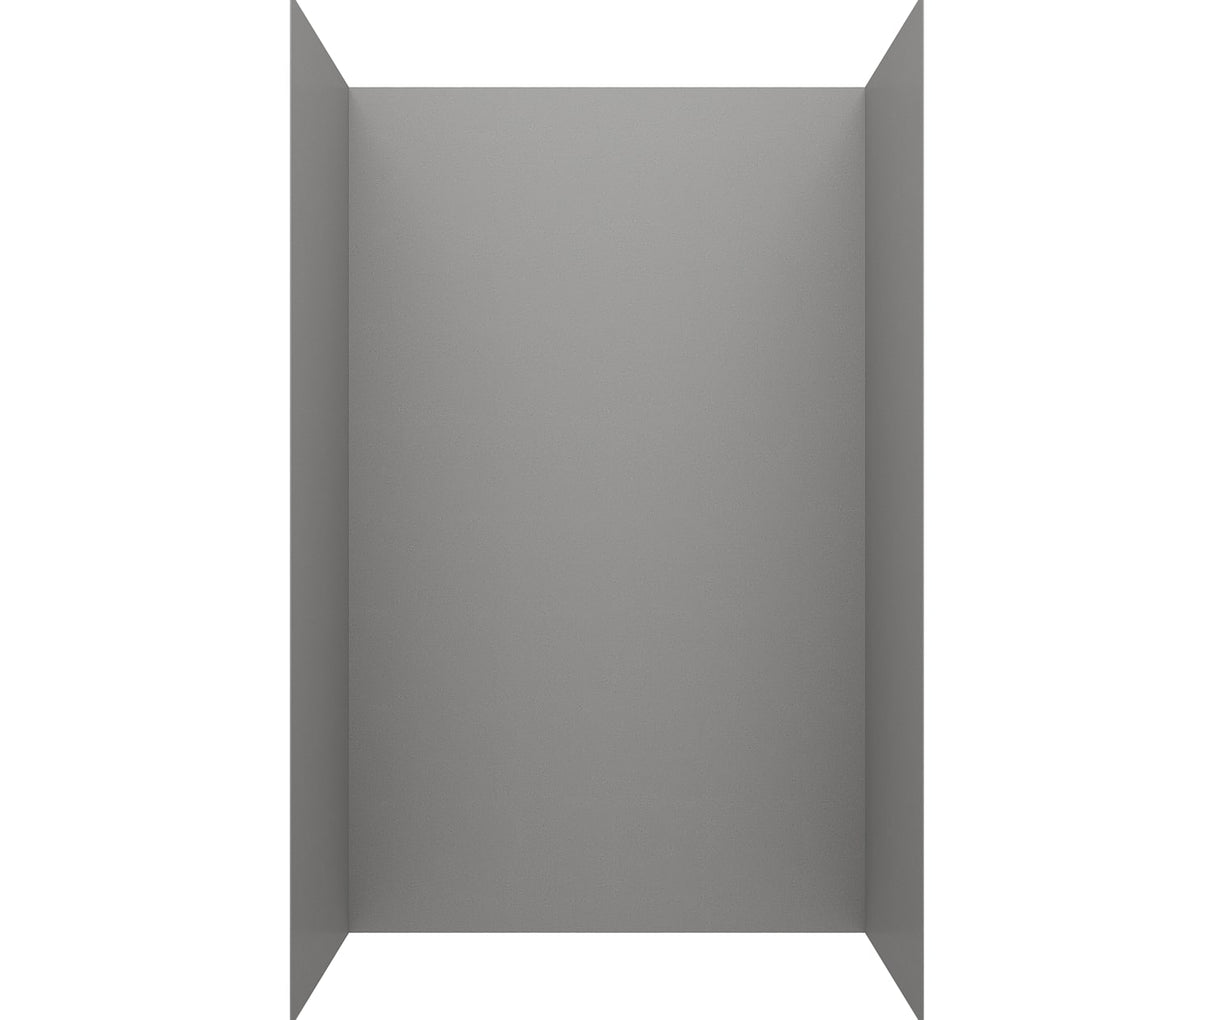 Swanstone SMMK96-3636 36 x 36 x 96 Swanstone Smooth Glue up Shower Wall Kit in Ash Gray SMMK963636.203